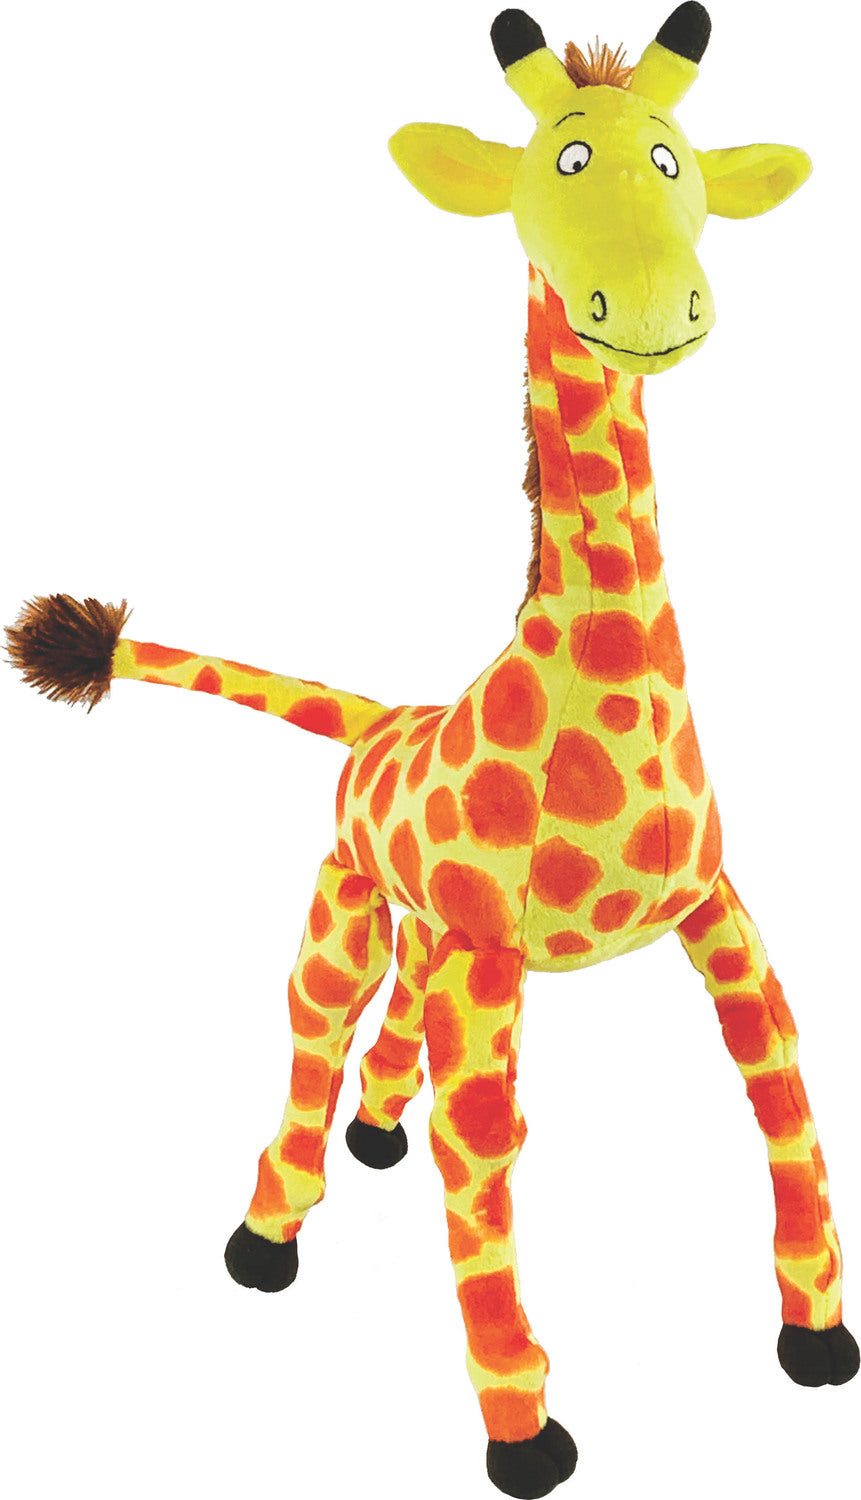 MerryMakers GIRAFFES CAN'T DANCE Doll